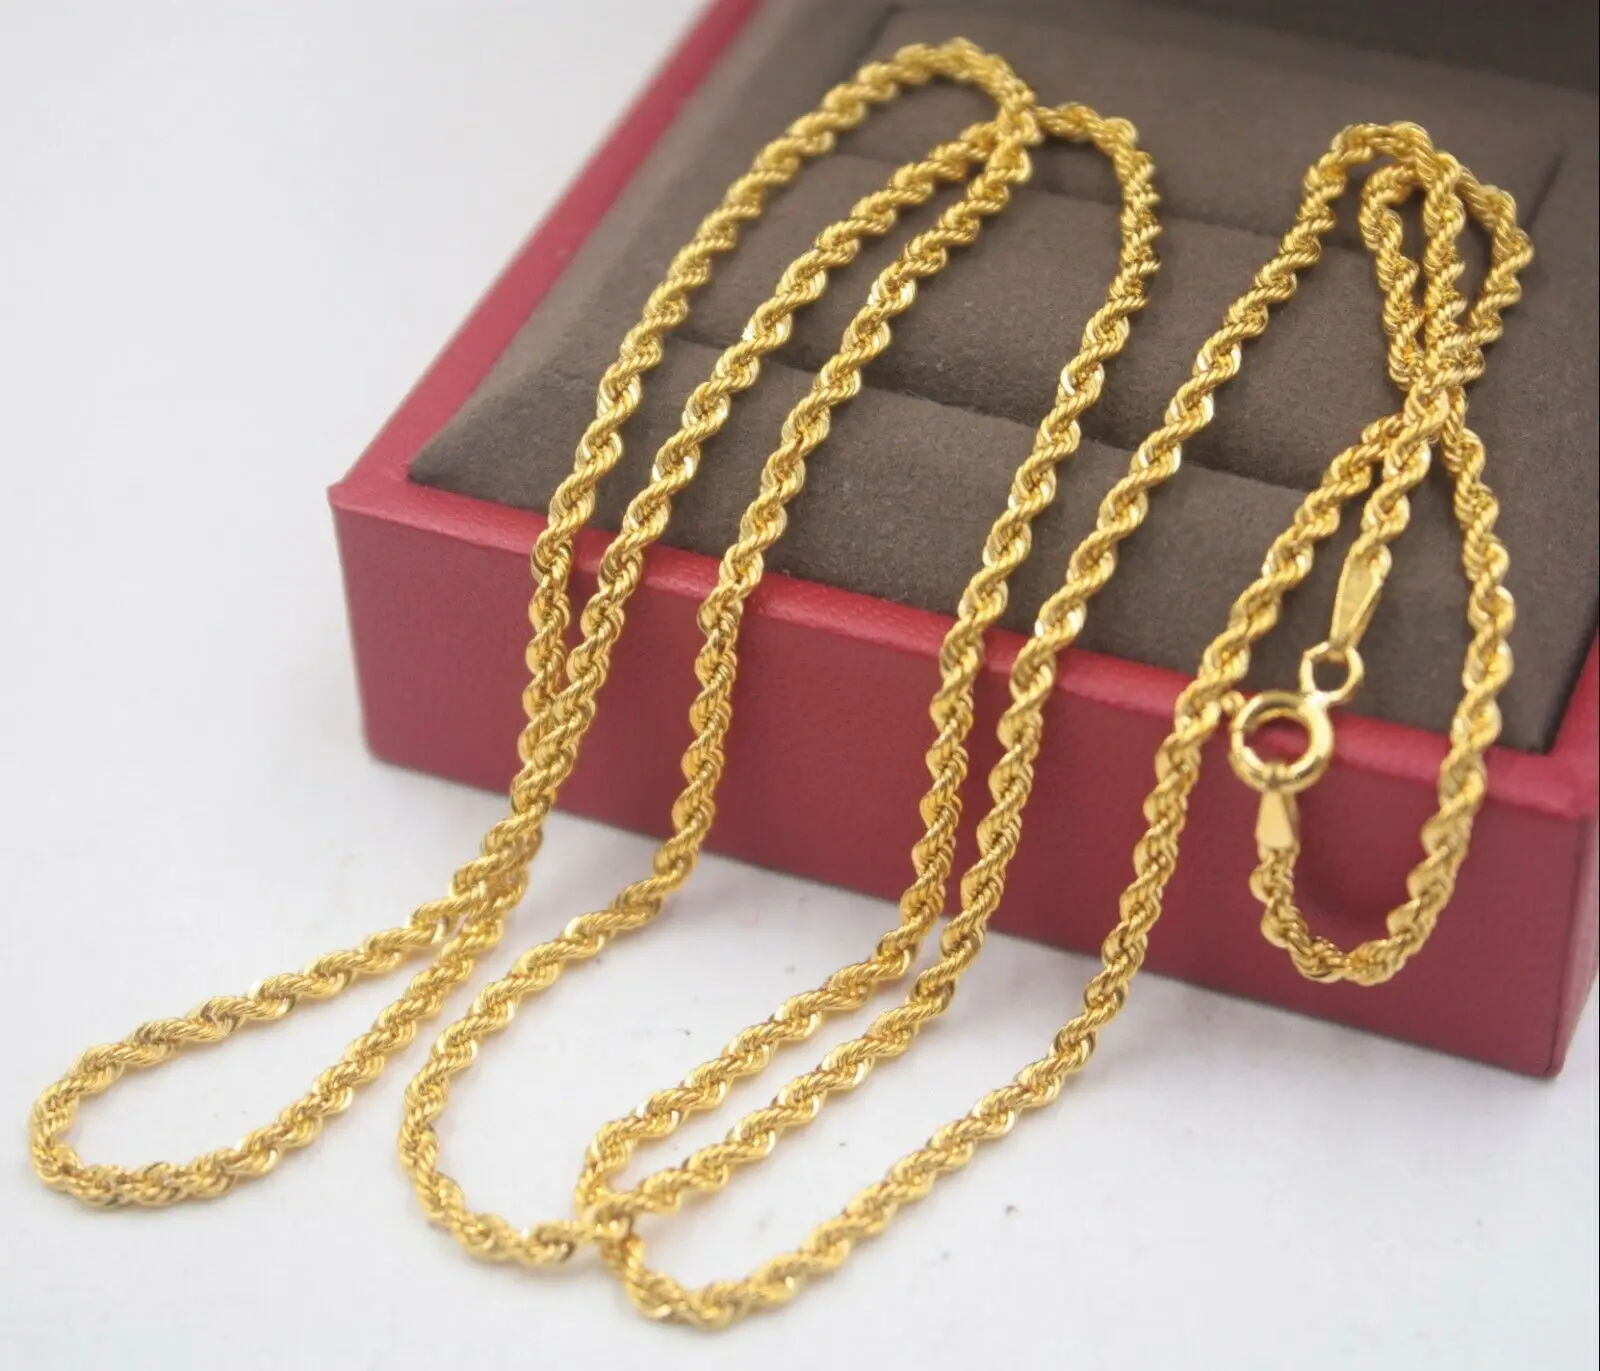 18K Solid Gold Rope Chain Necklace Men Women 16" 18" 20" 22" 24" 26" 28" 30 